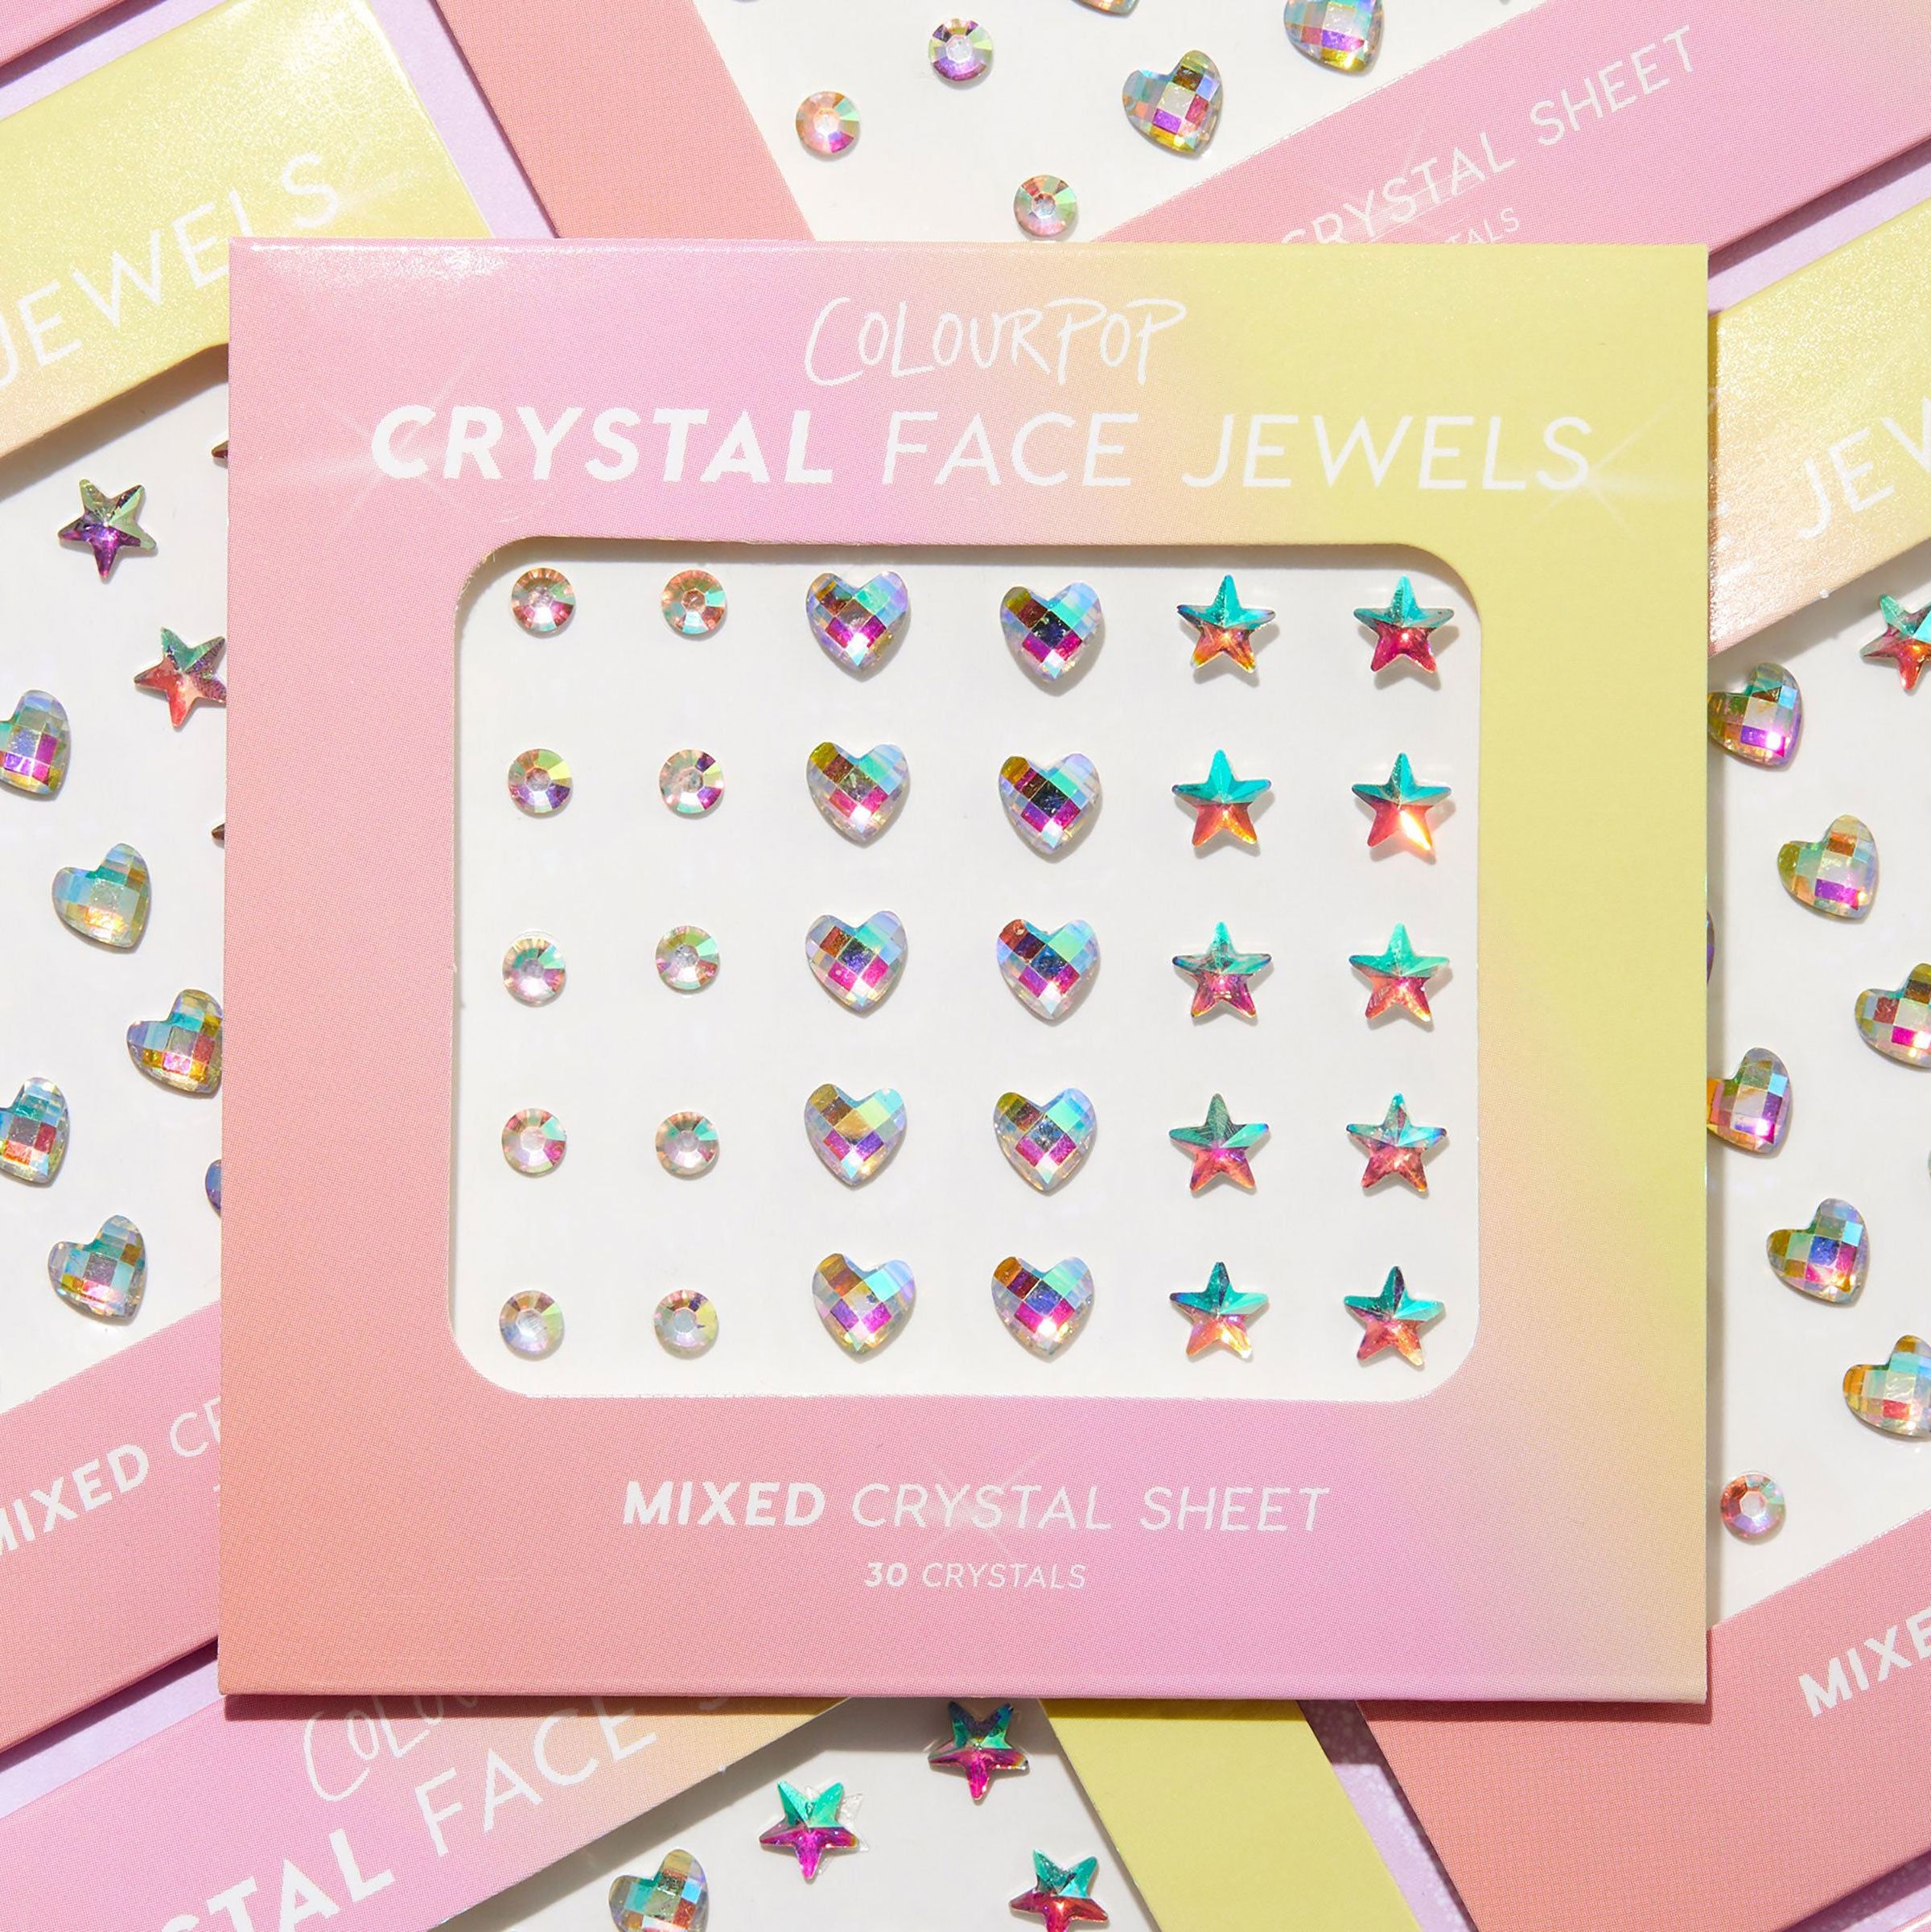 Causing a Sparkle: The Rise of Face Gems